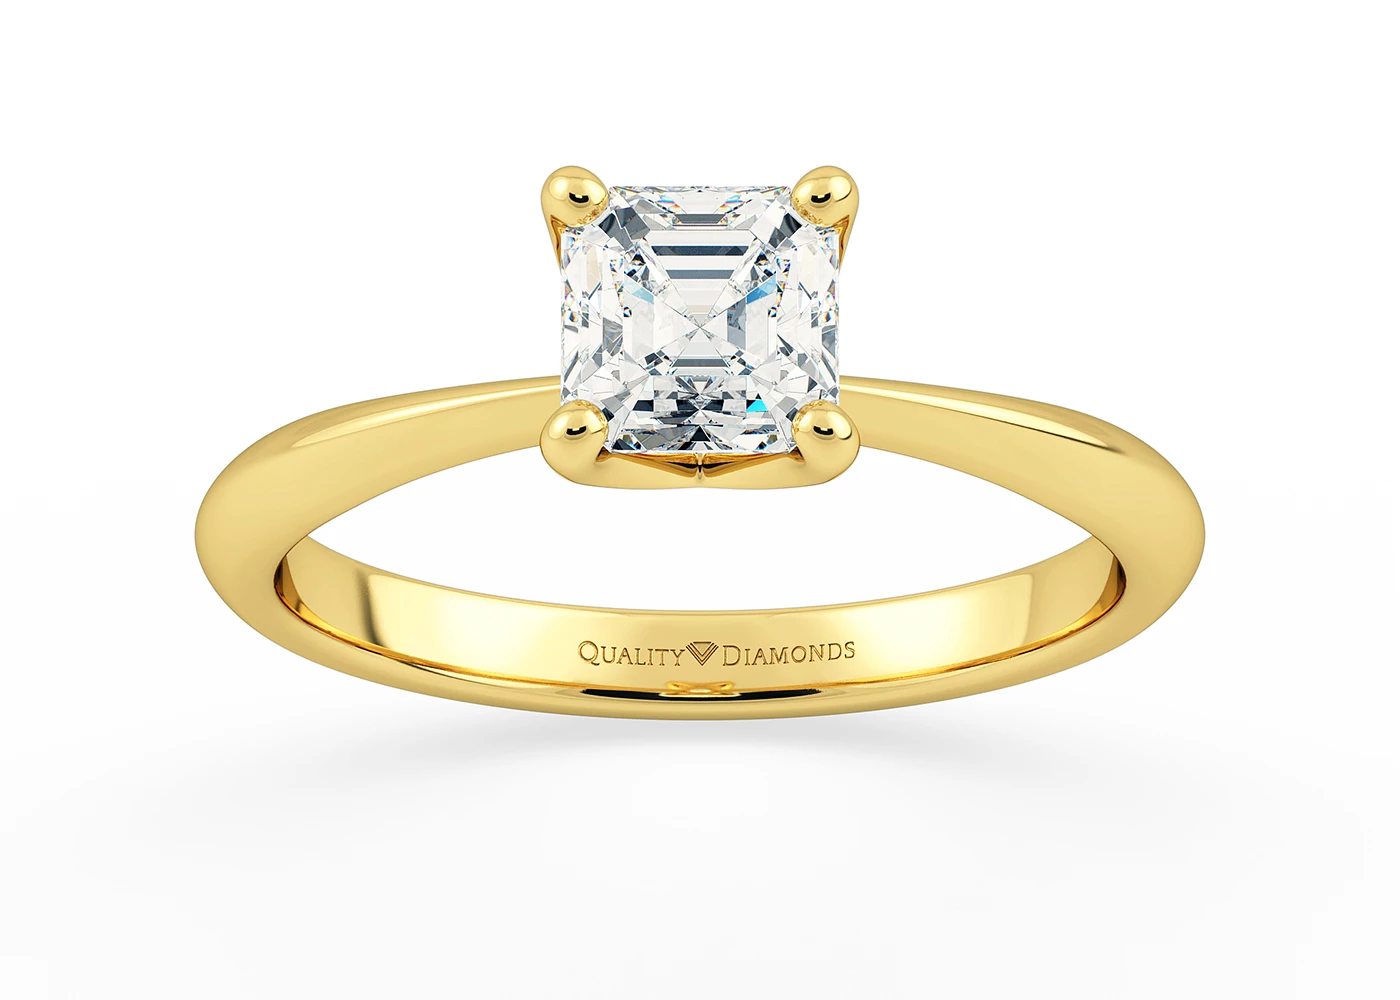 Two Carat Asscher Solitaire Diamond Engagement Ring in 18K Yellow Gold